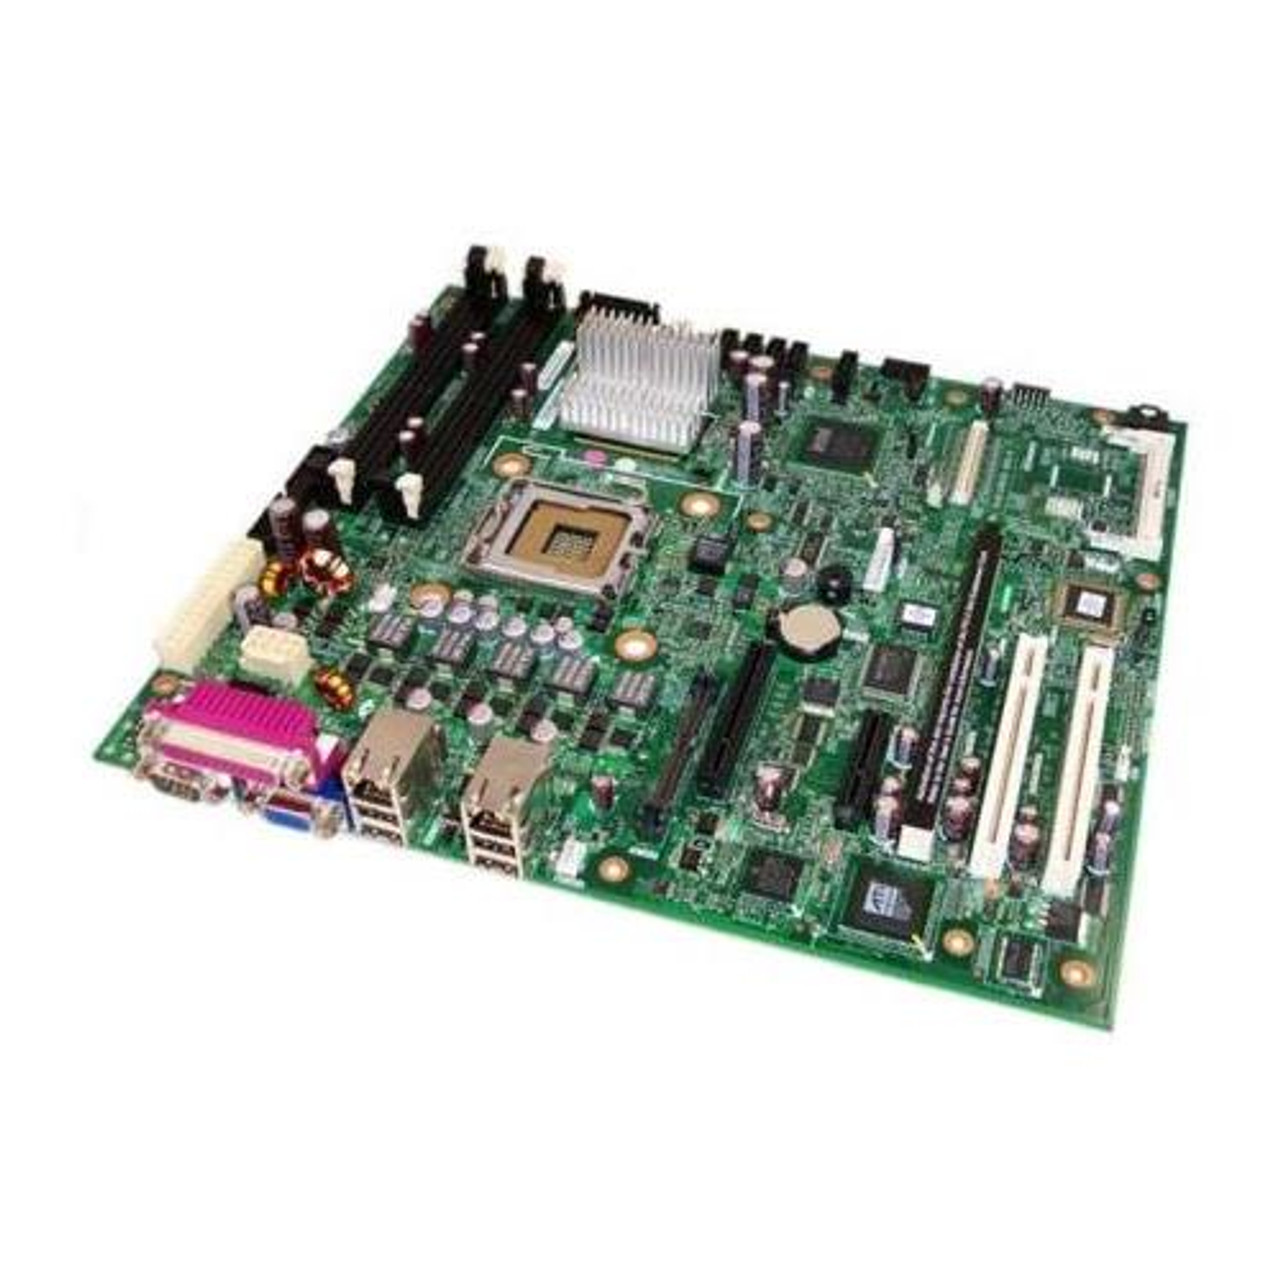 44E7312 IBM System Board (Motherboard) for xSeries x3200 M2 (Refurbished)